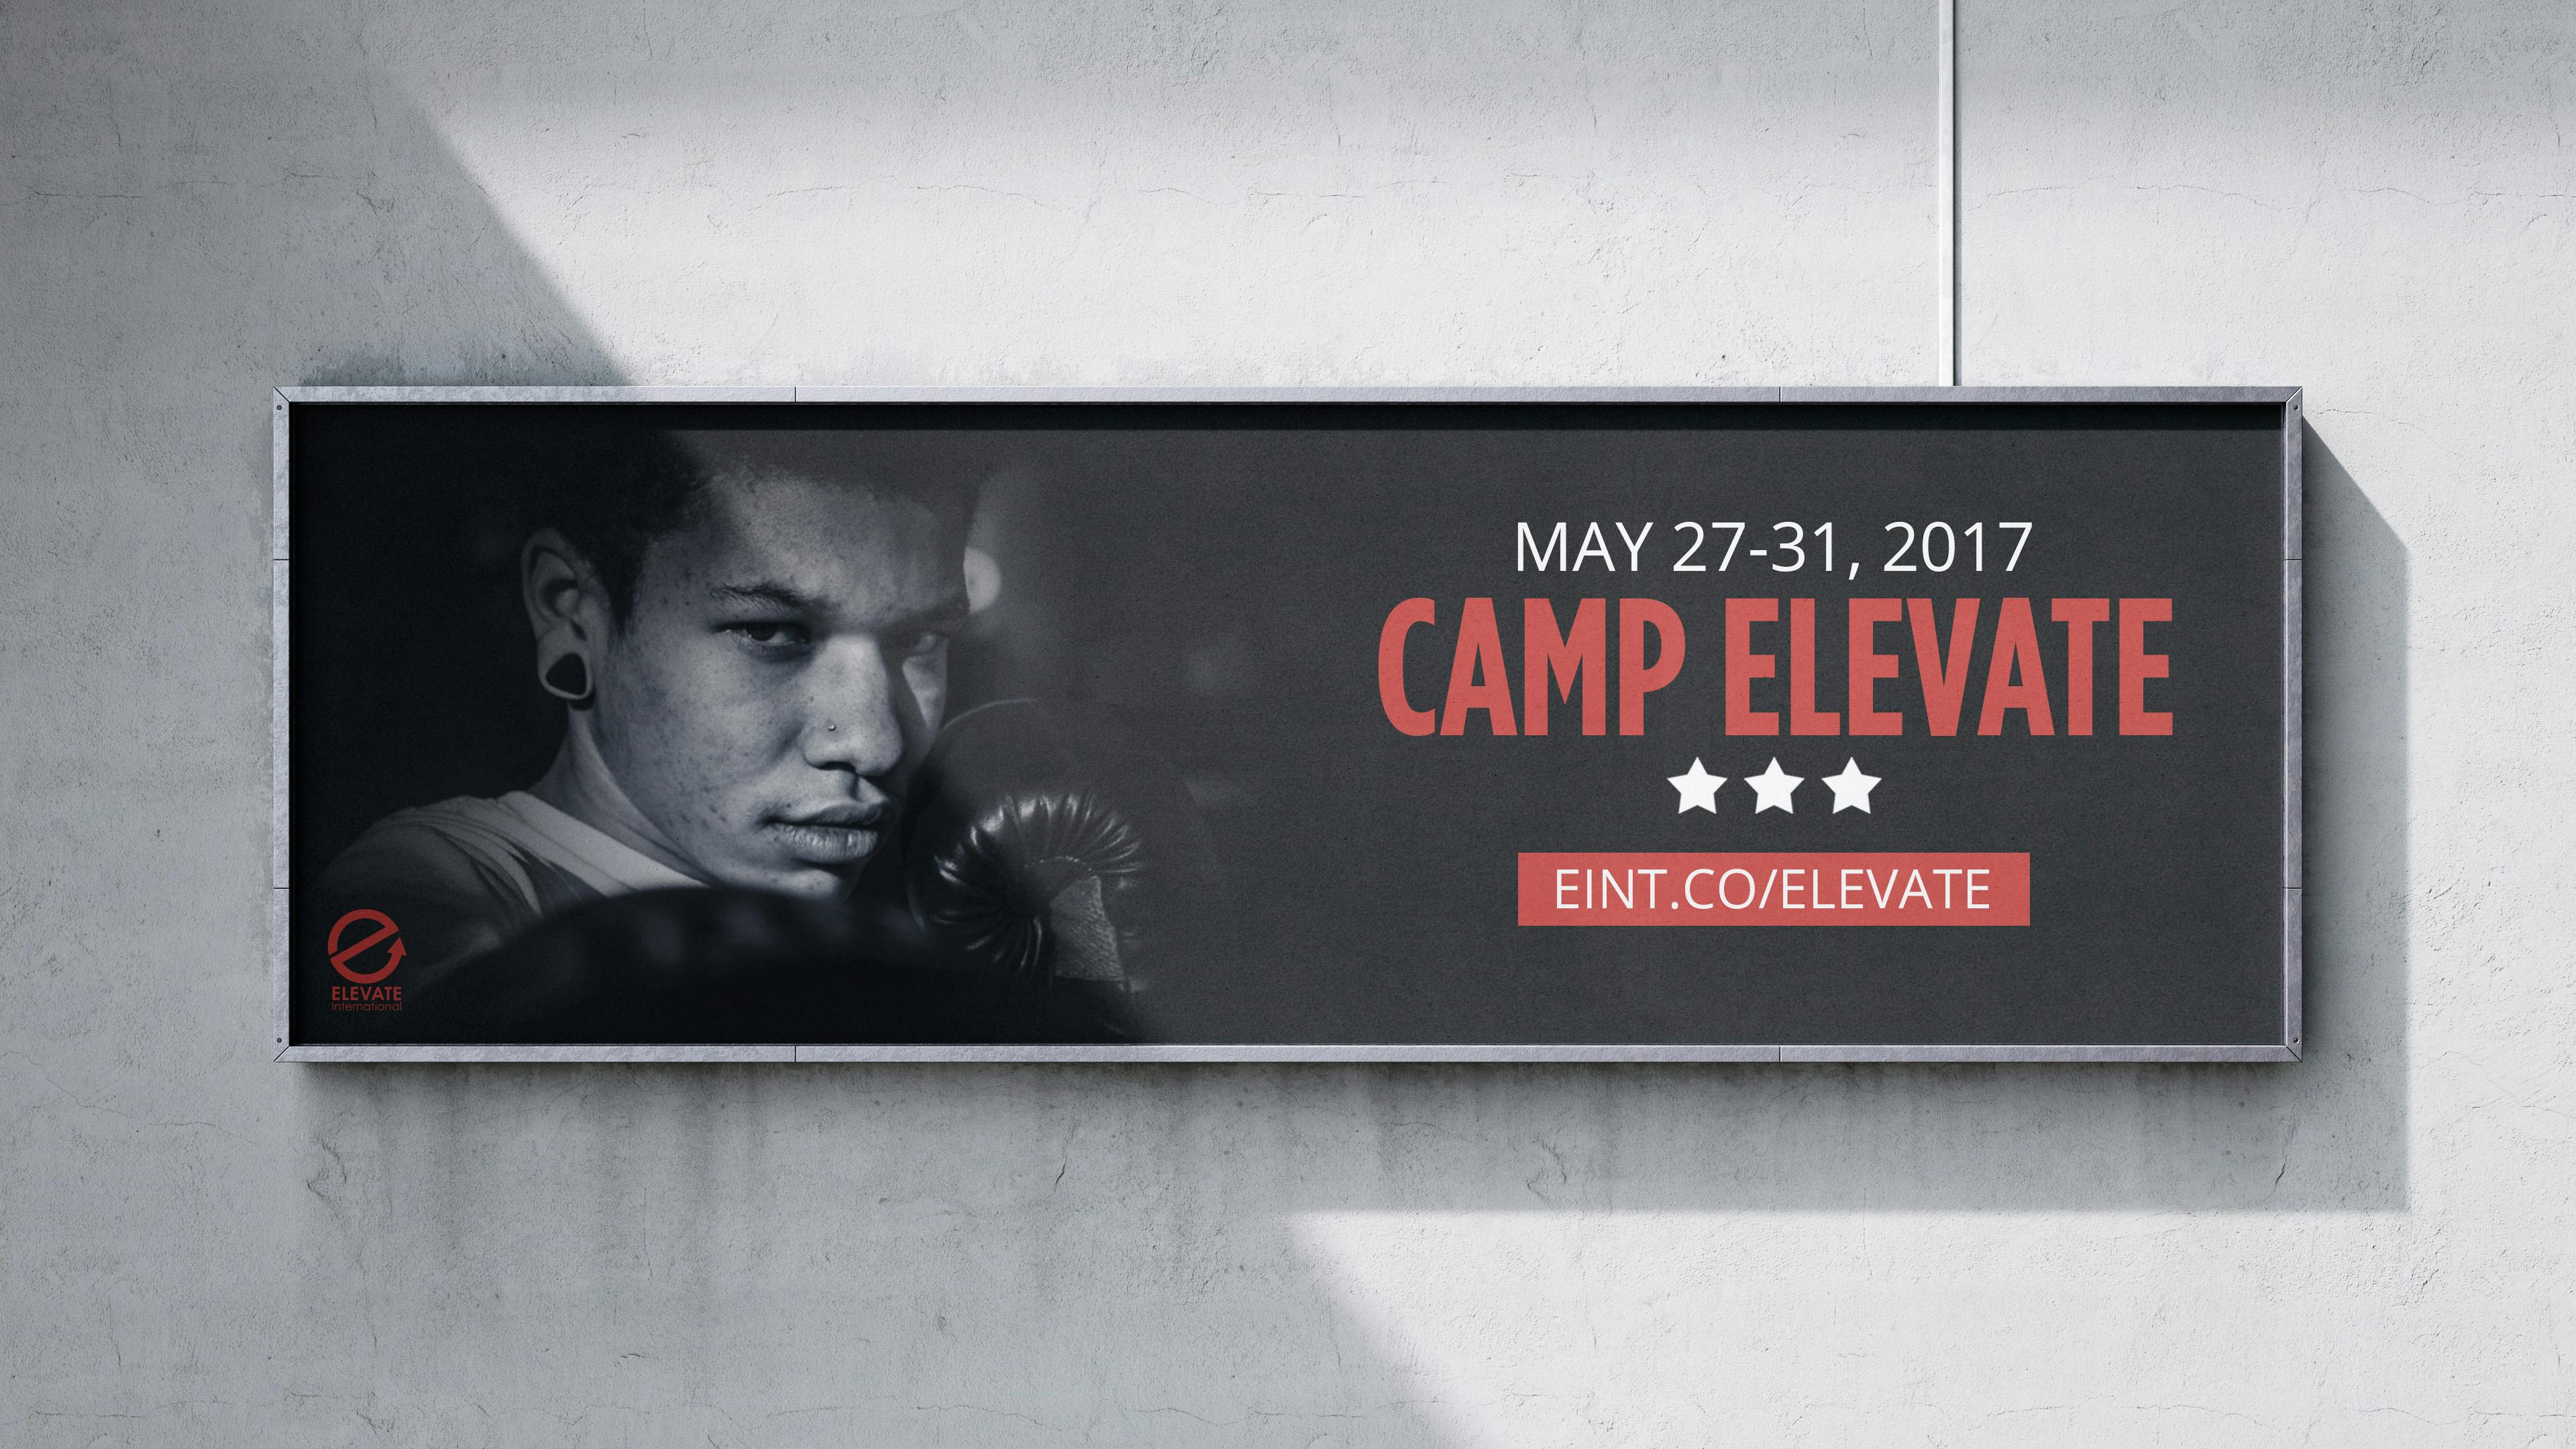 Mockup of a Camp Elevate billboard with a picture of a kid boxer with the word "May 27-31, 2017. Camp Elevate"